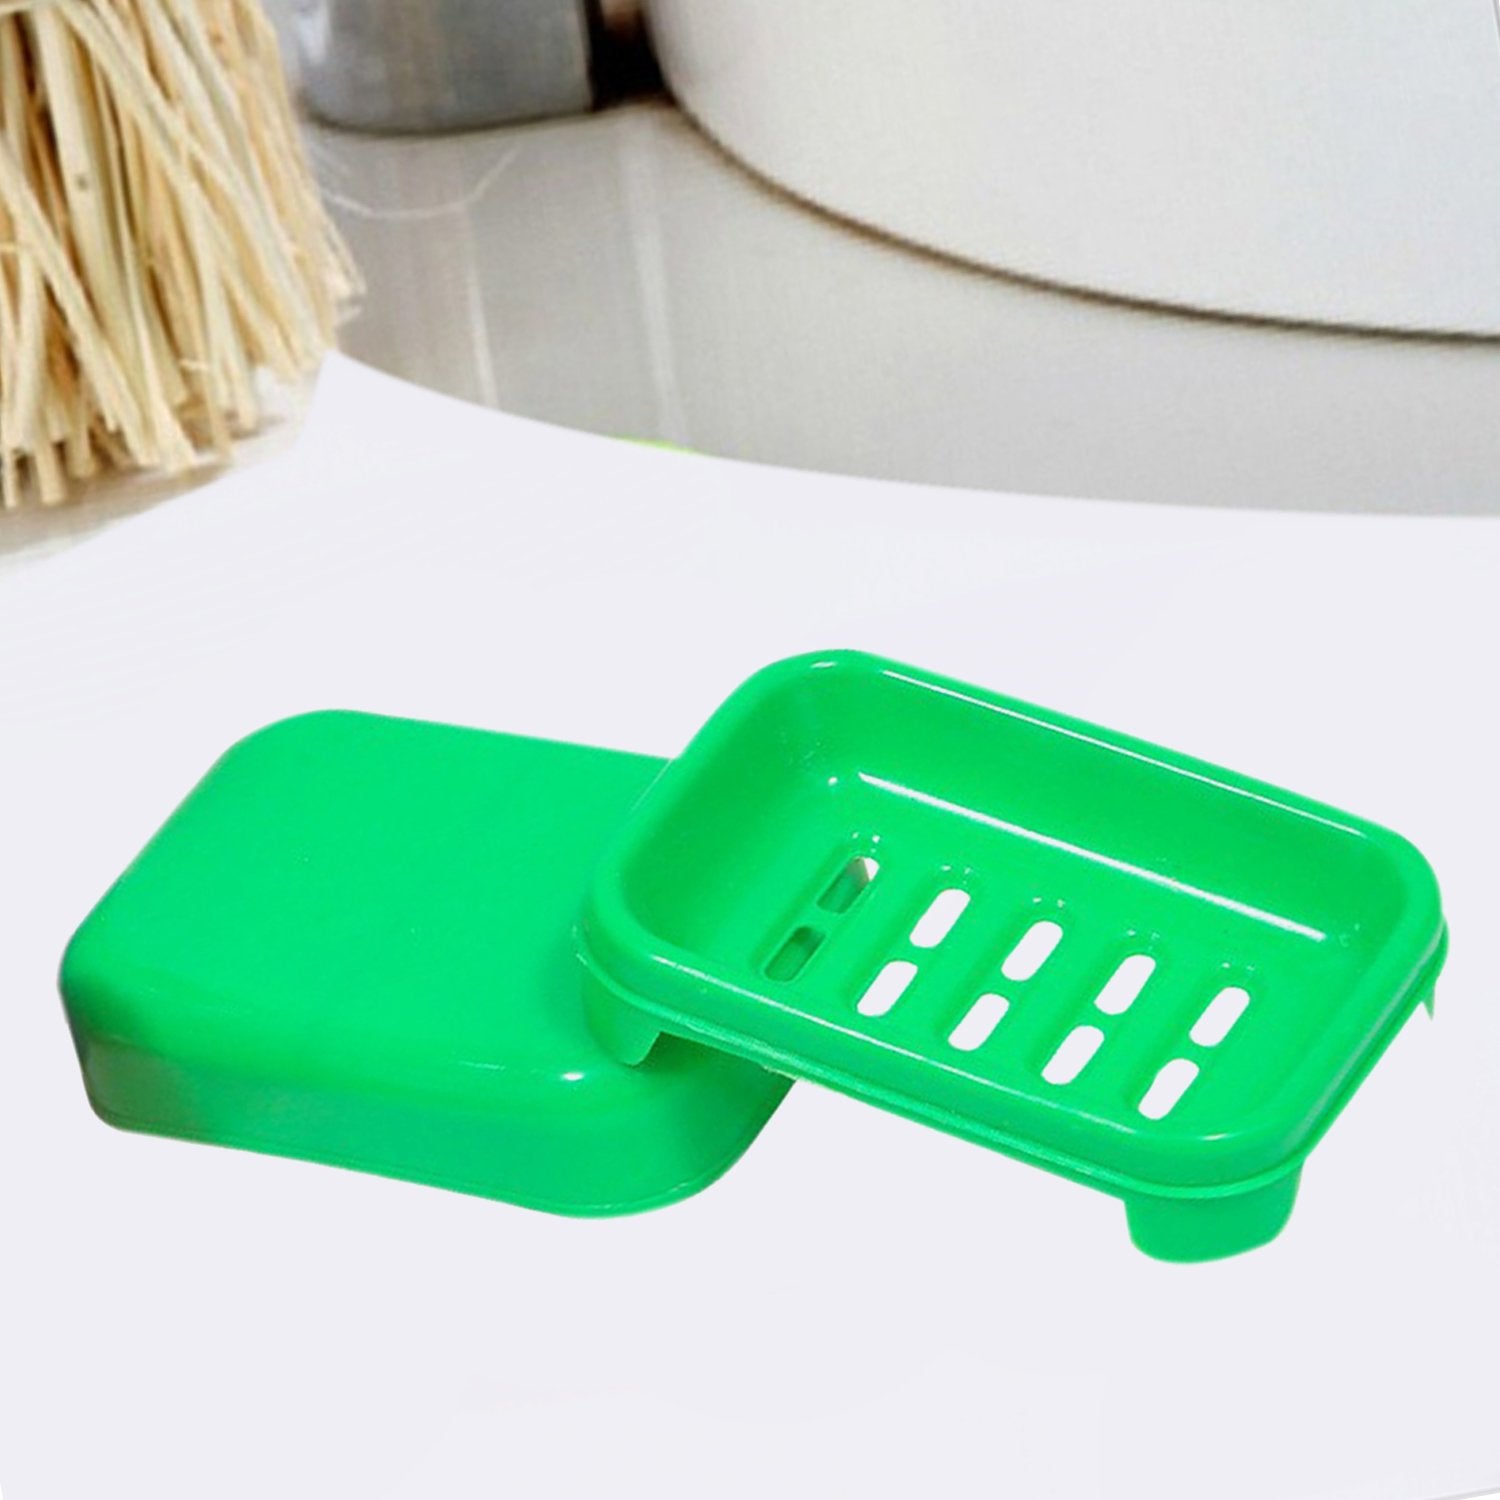 1128 Covered Soap keeping Plastic Case for Bathroom use - SkyShopy